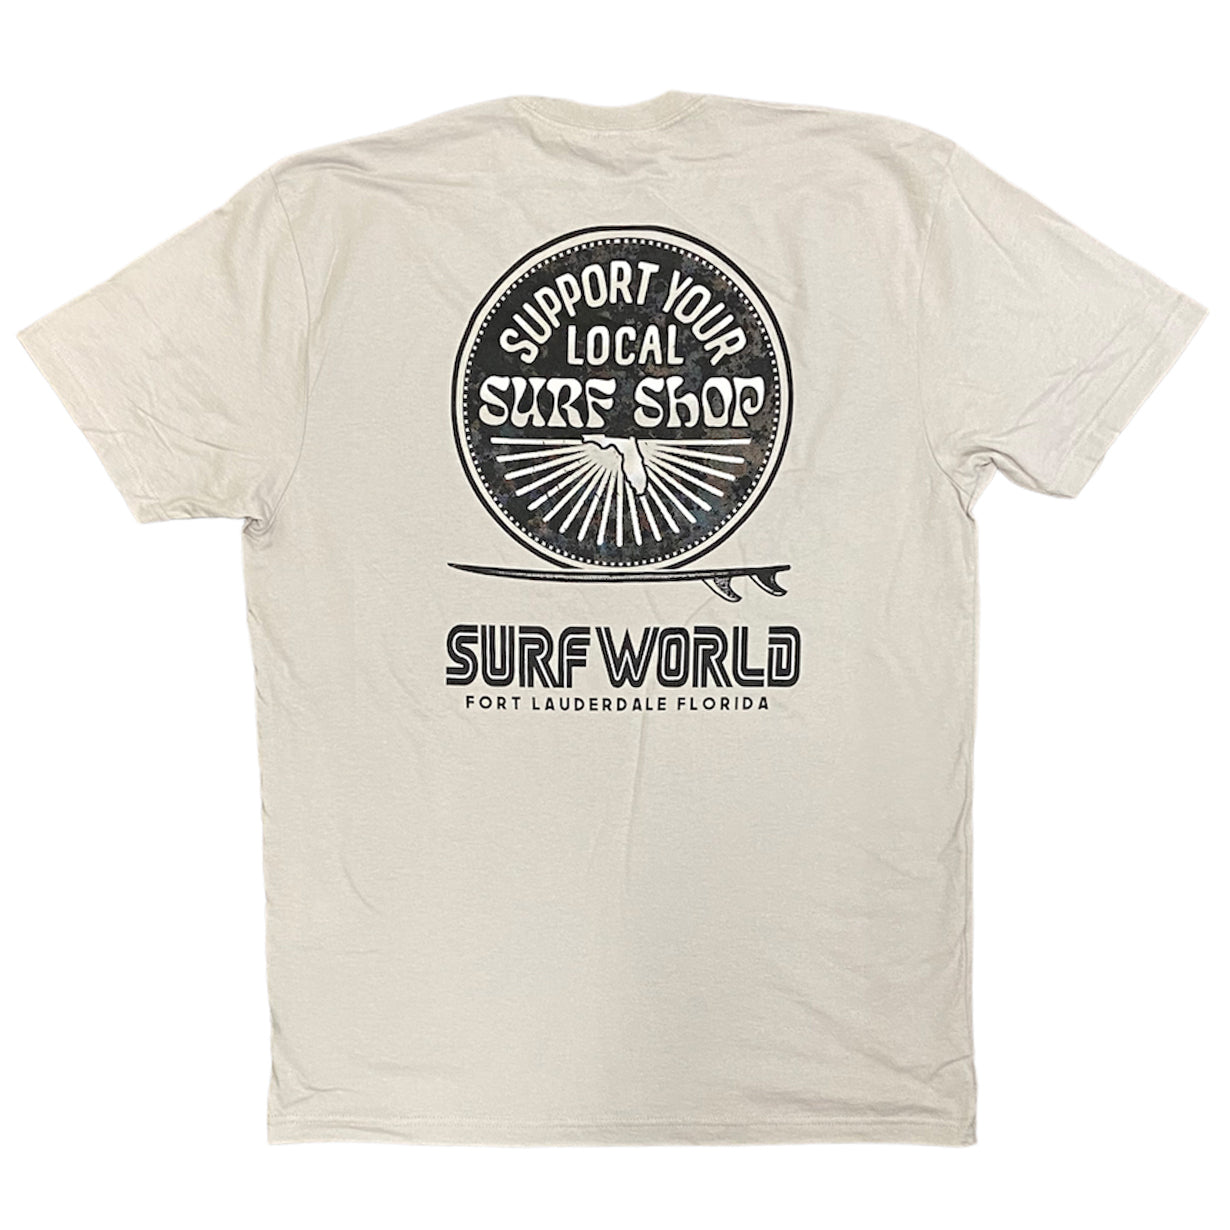 Surf World Support Your Local Surf Shop Tee Florida - Multi Colors Mens T Shirt Silver